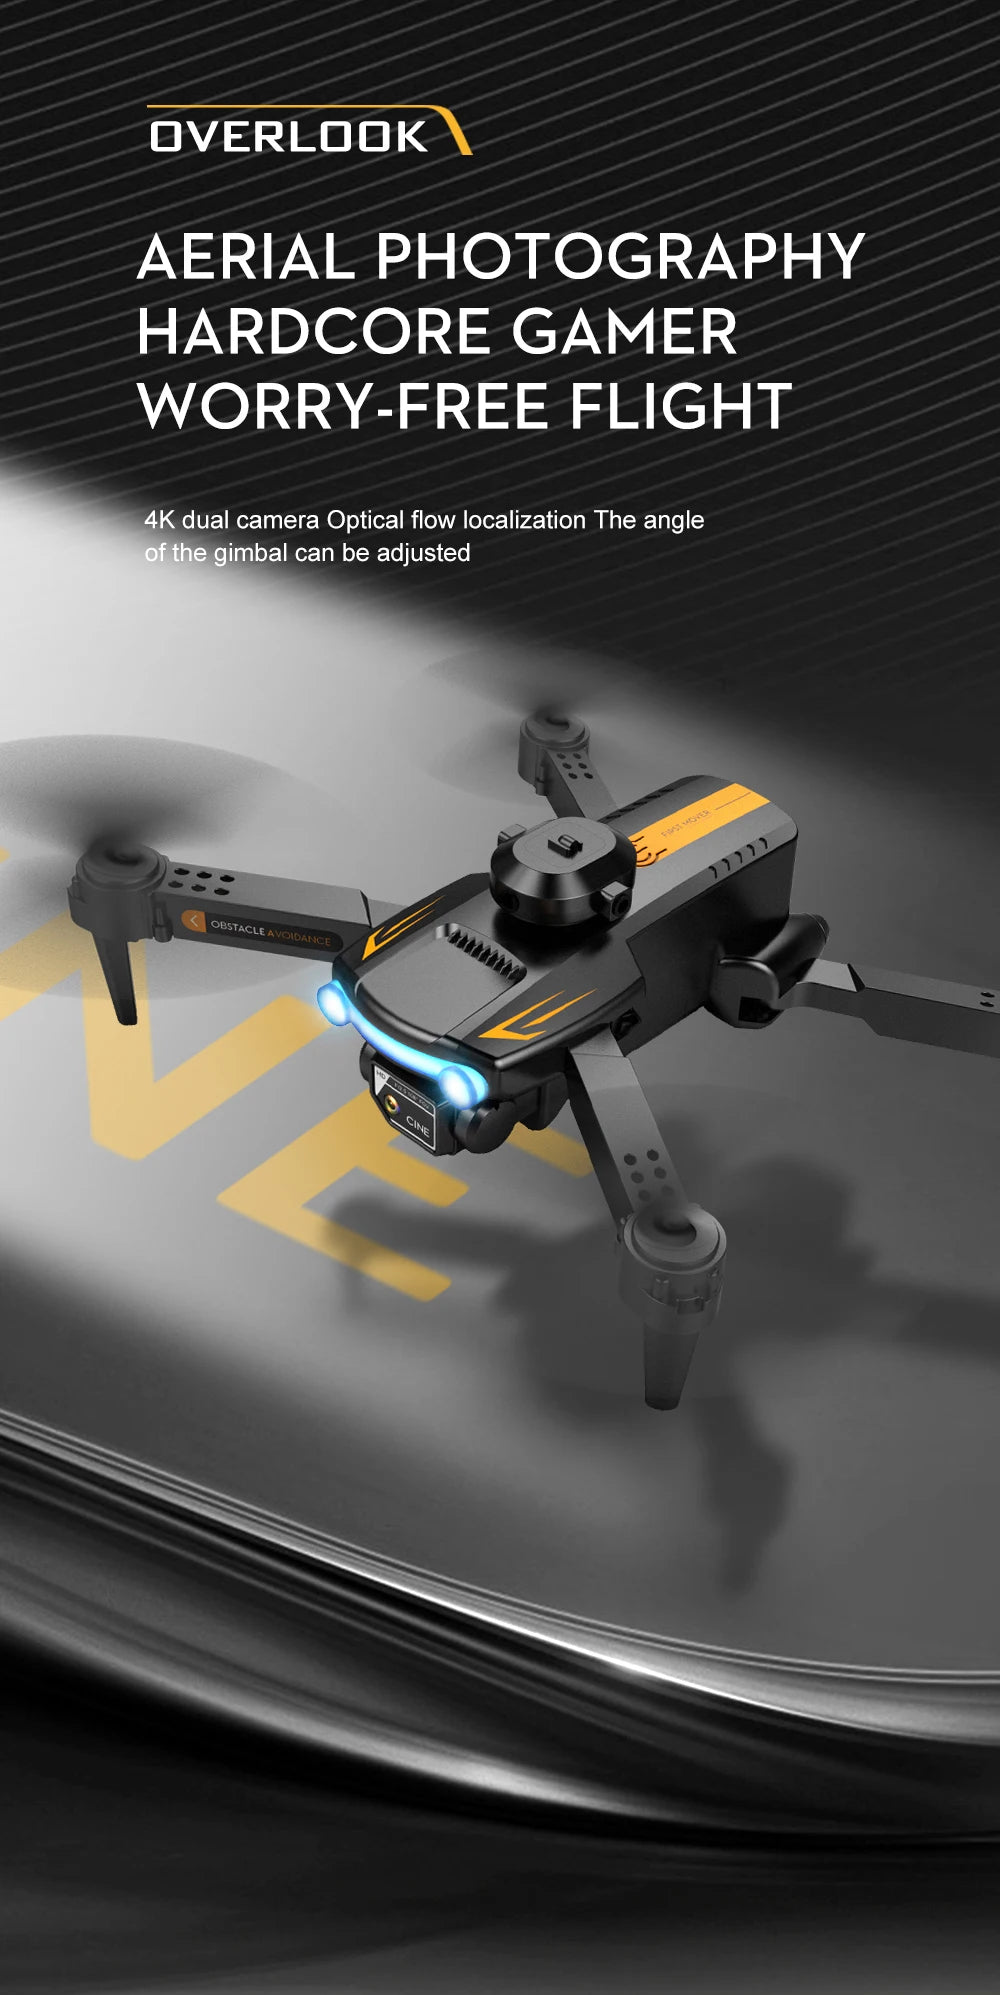 LSRC XT2 Drone, the angle of the gimbal can be adjusted orstacle